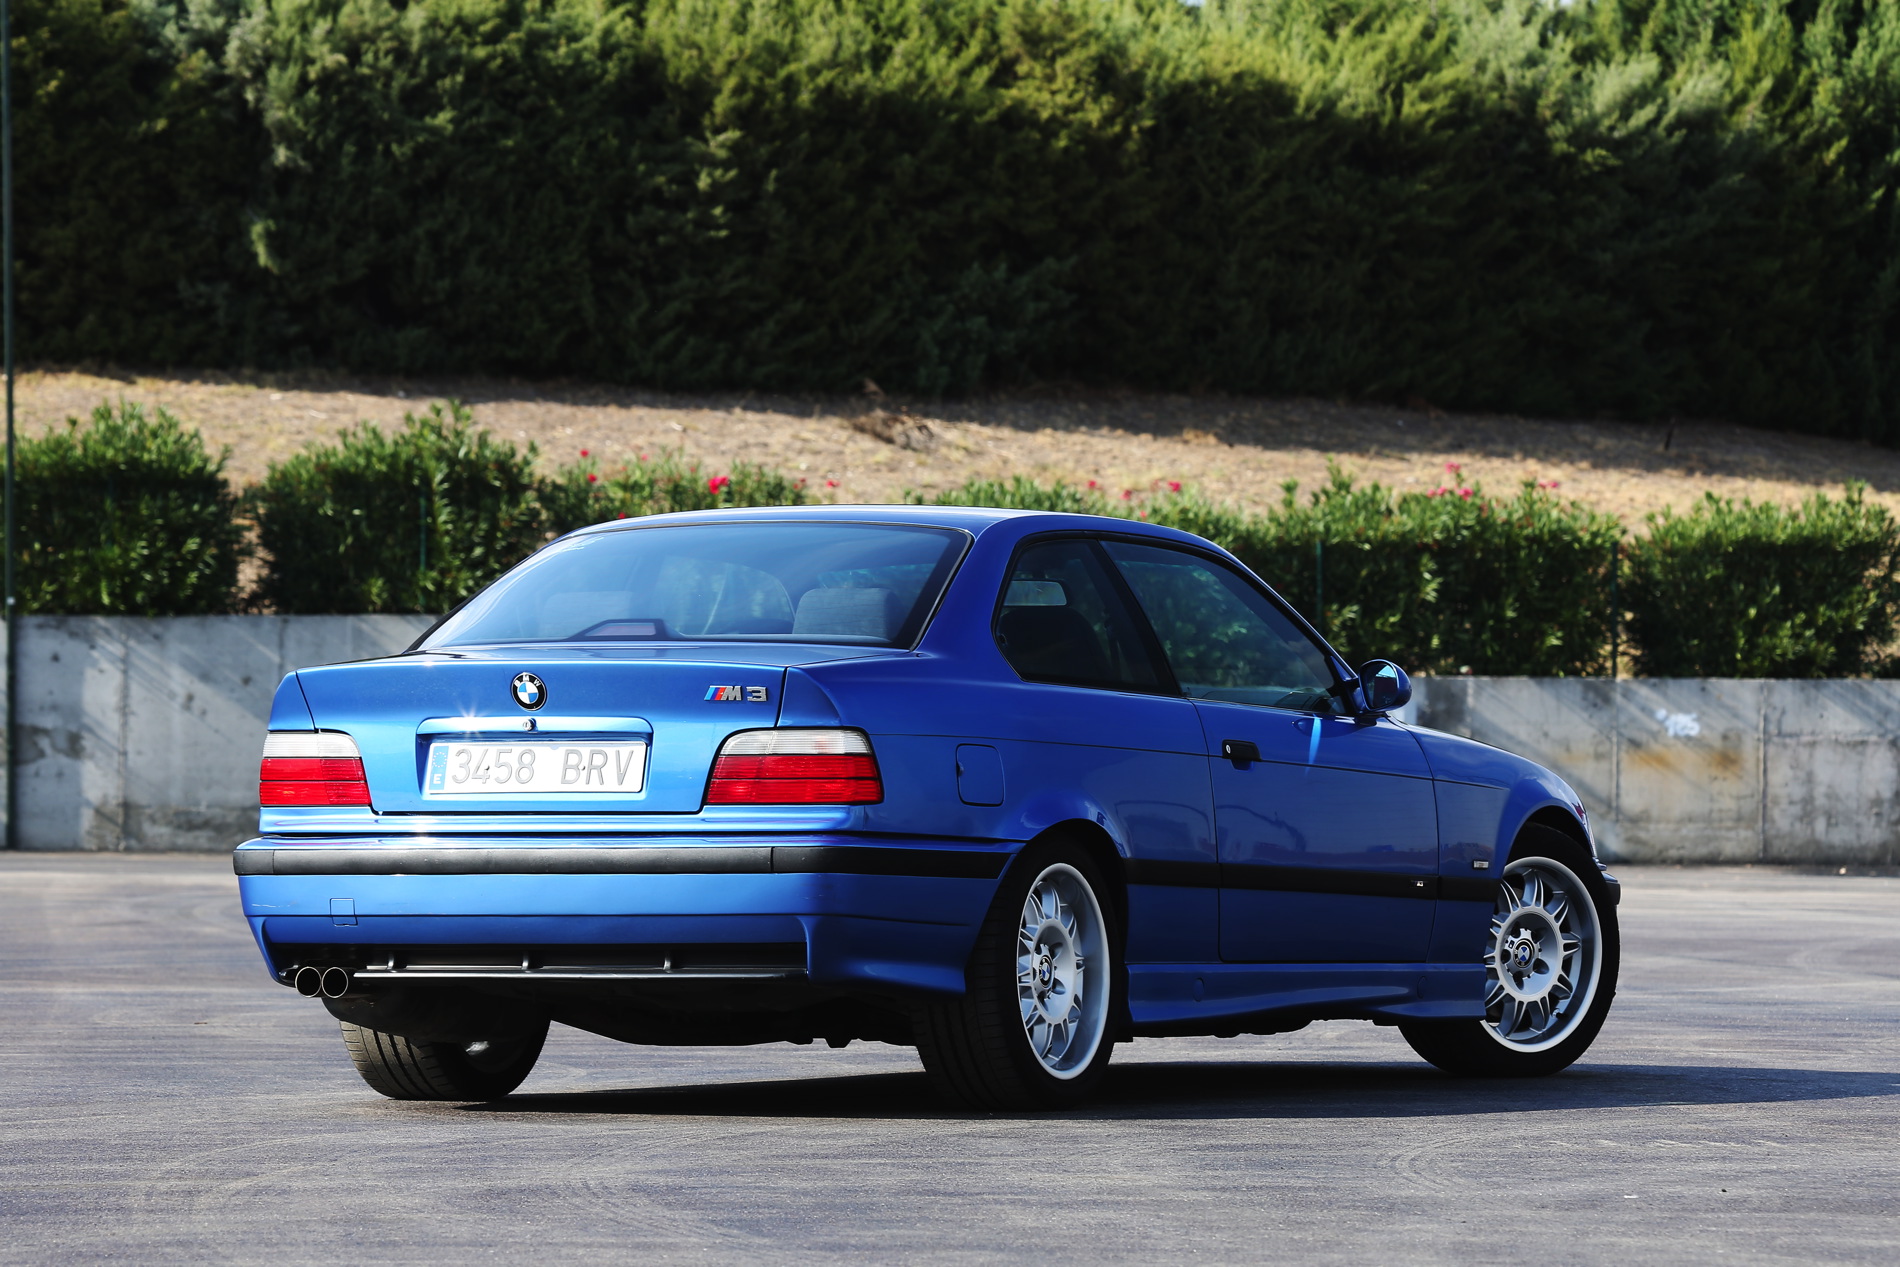 The E36 M3 was not just "another BMW”